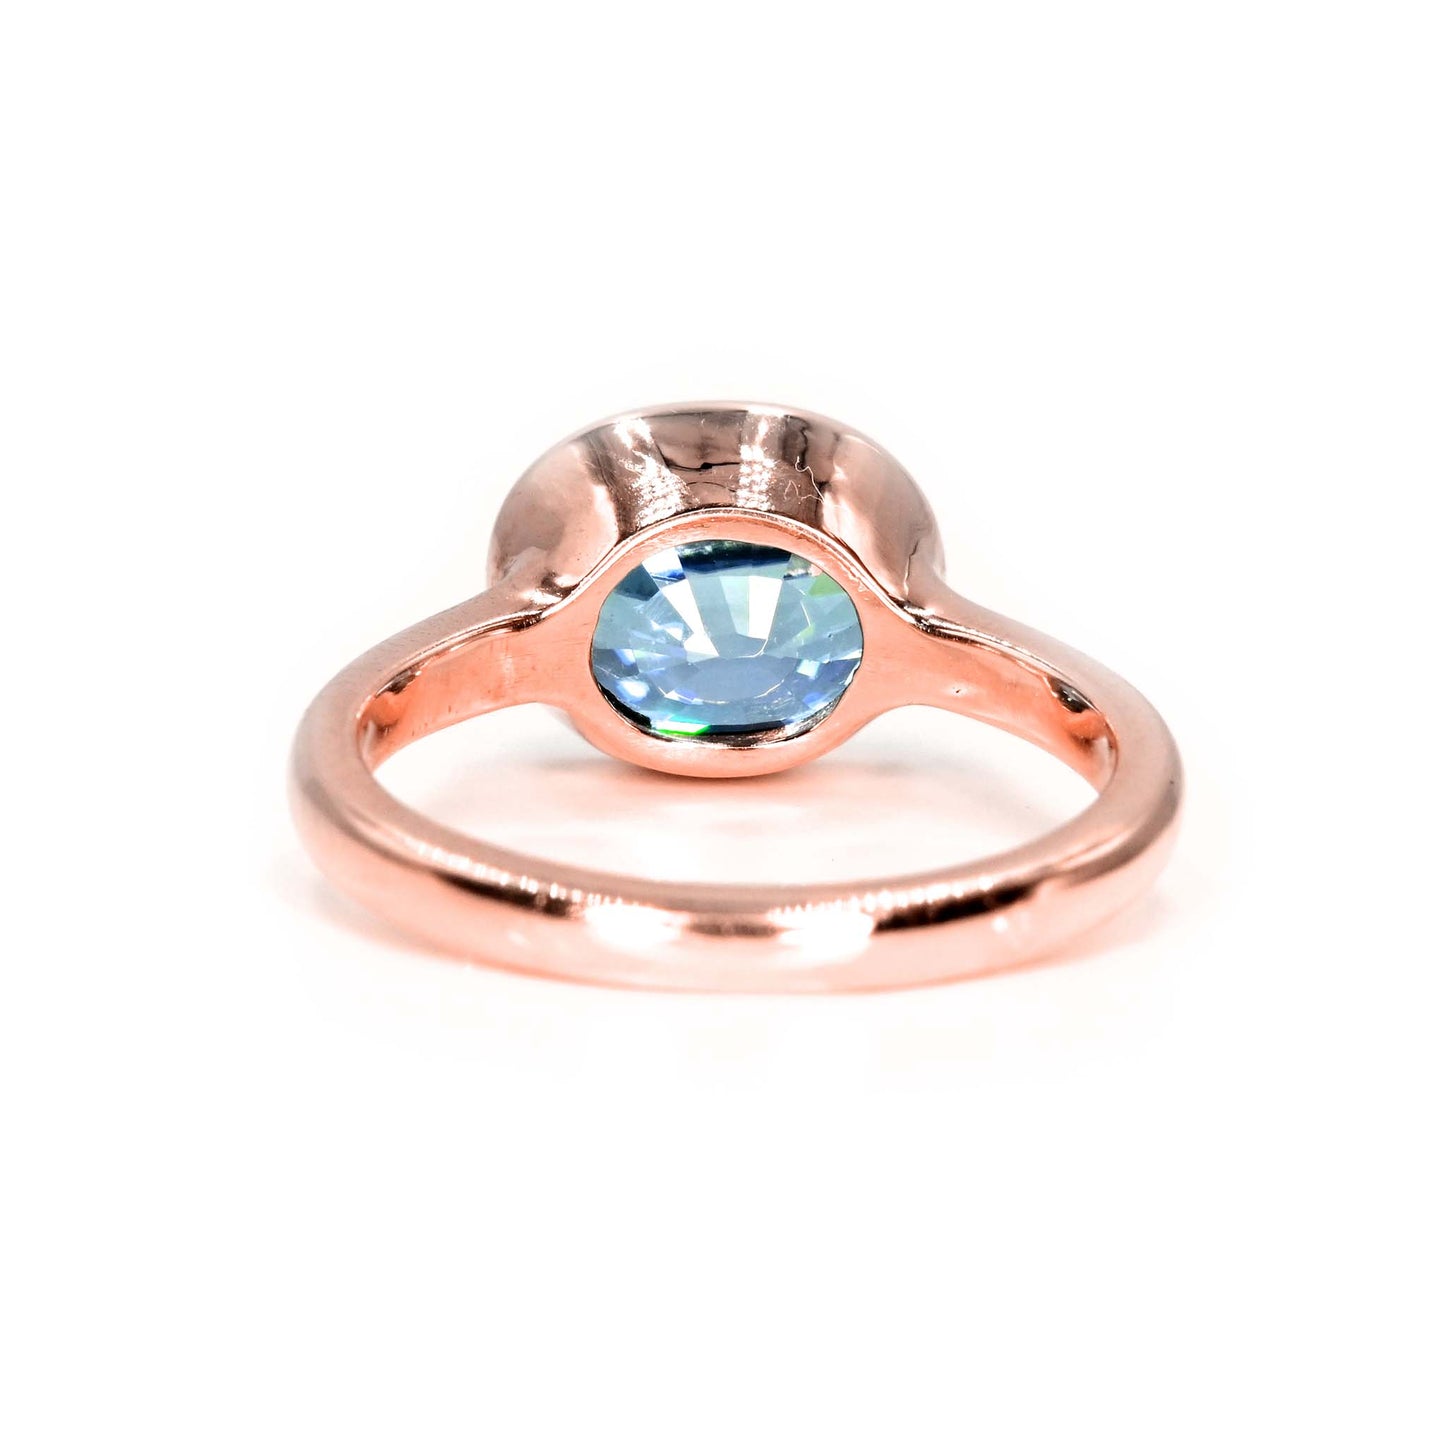 Romantic rose gold with blue zircon ring available in Chiang Mai